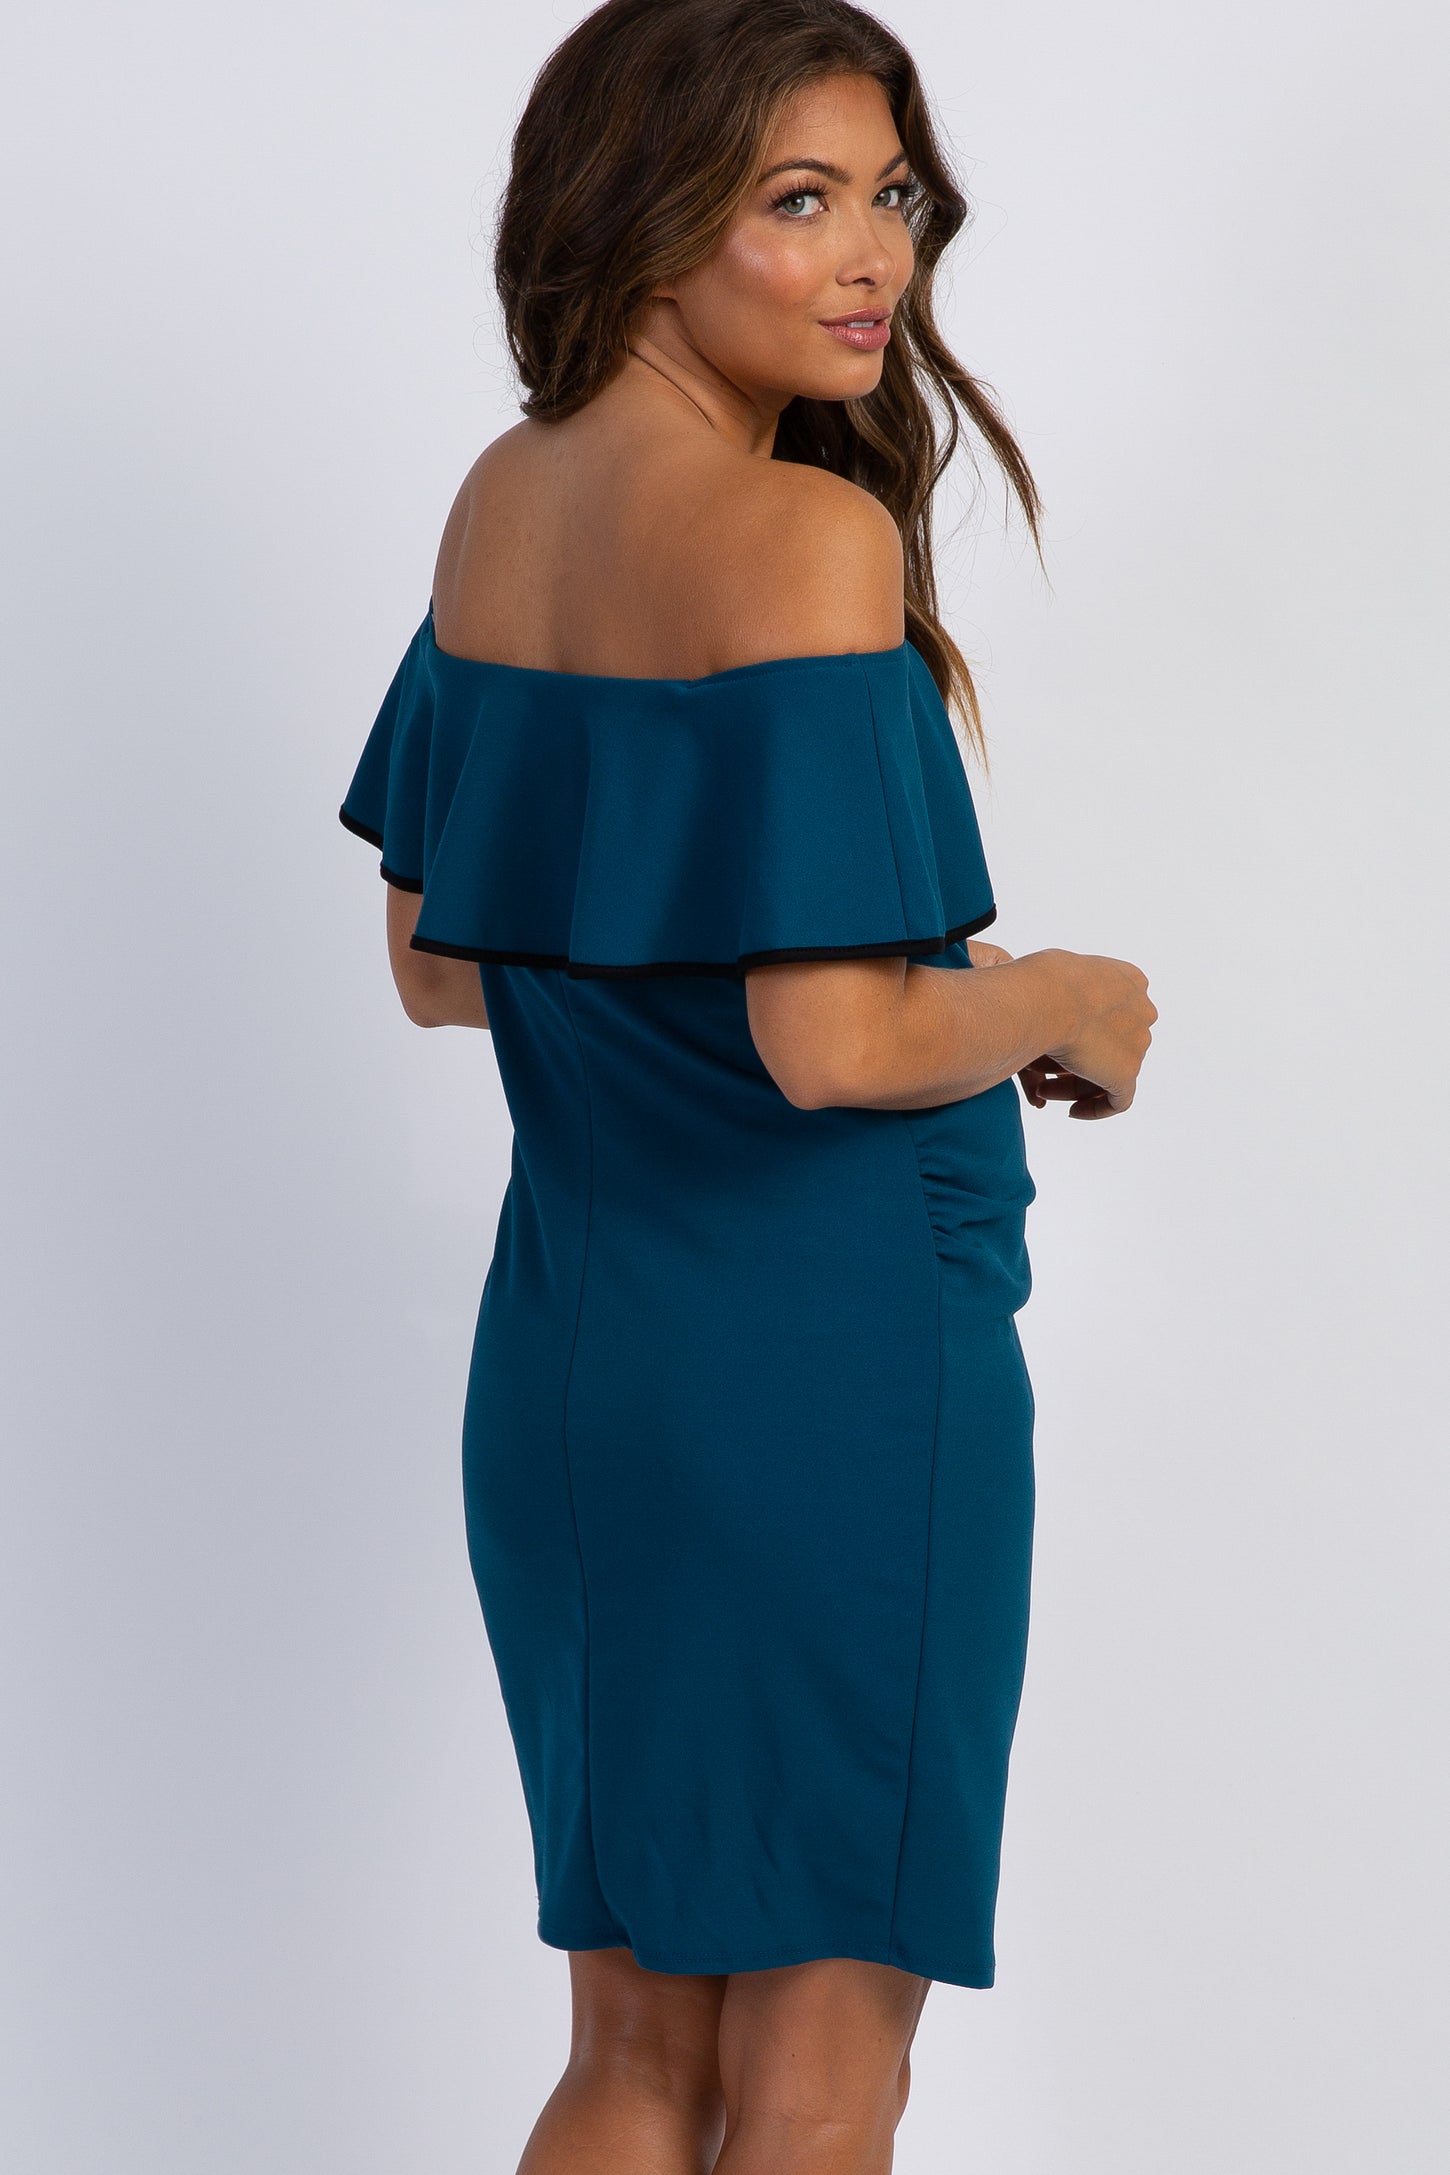 Dark Teal Off Shoulder Ruffle Fitted Maternity Dress